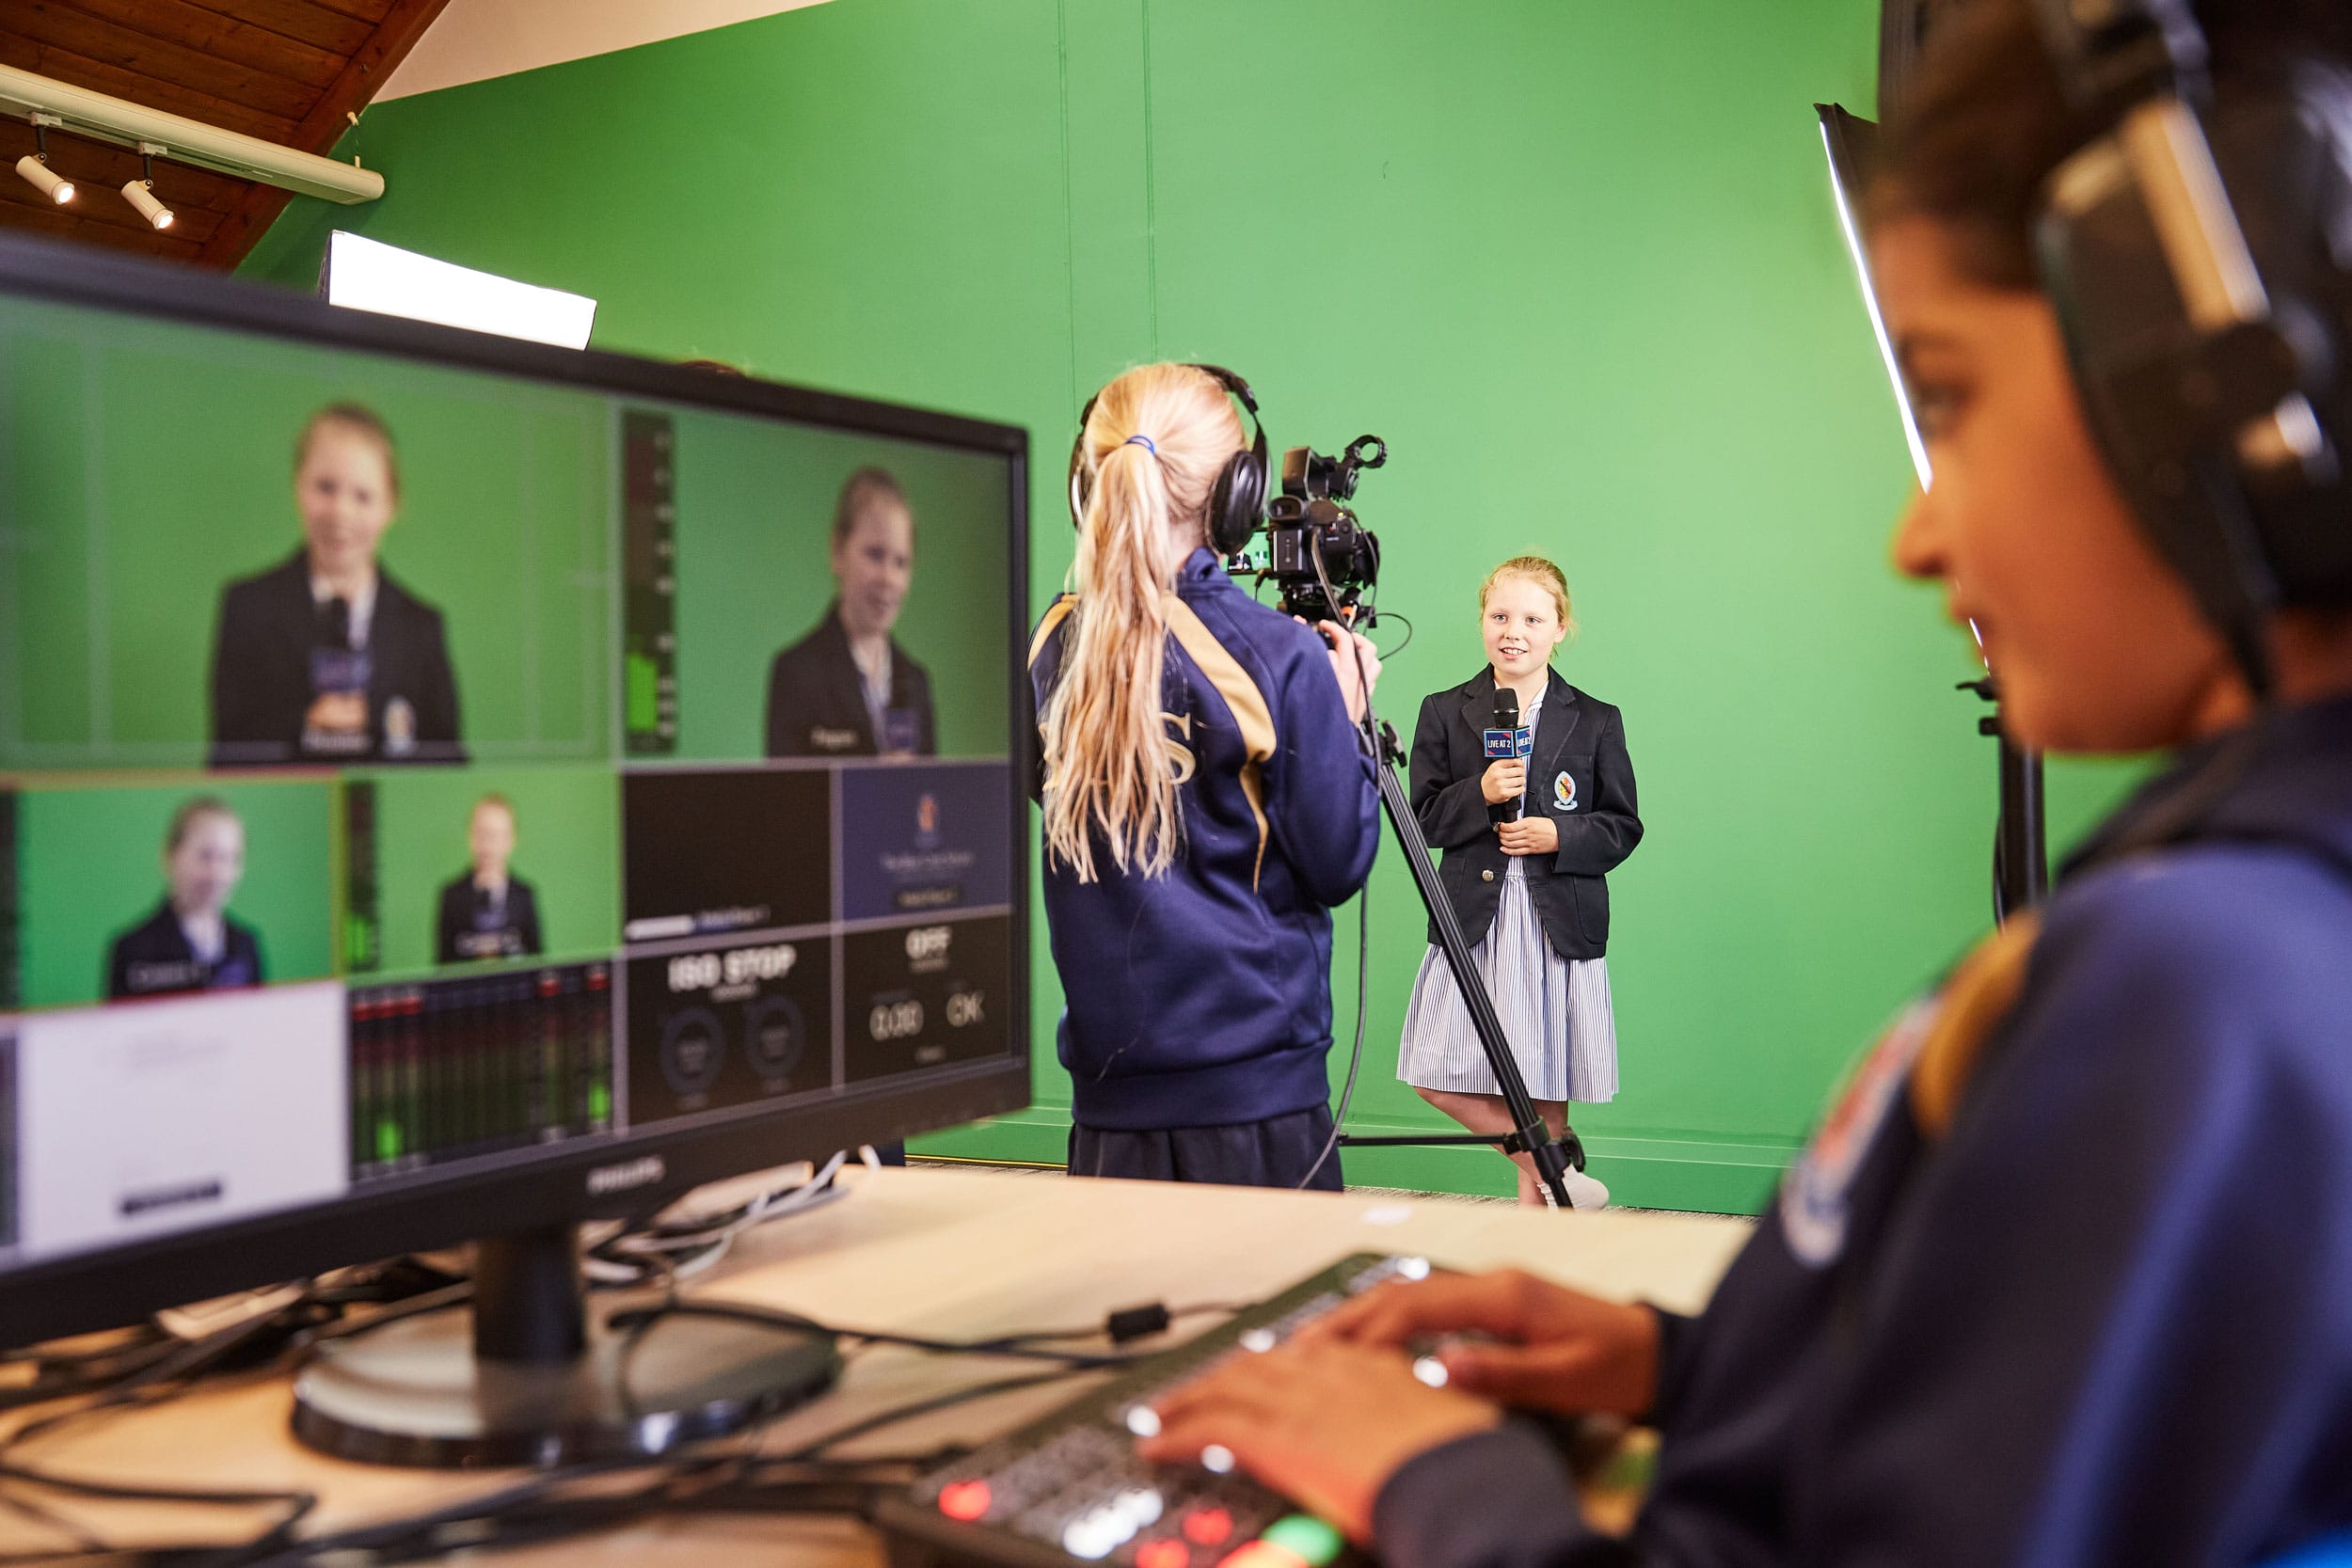 A pupil is being interviewed by another pupil behind a camera on a green screen and another pupil is looking at the editing screen.